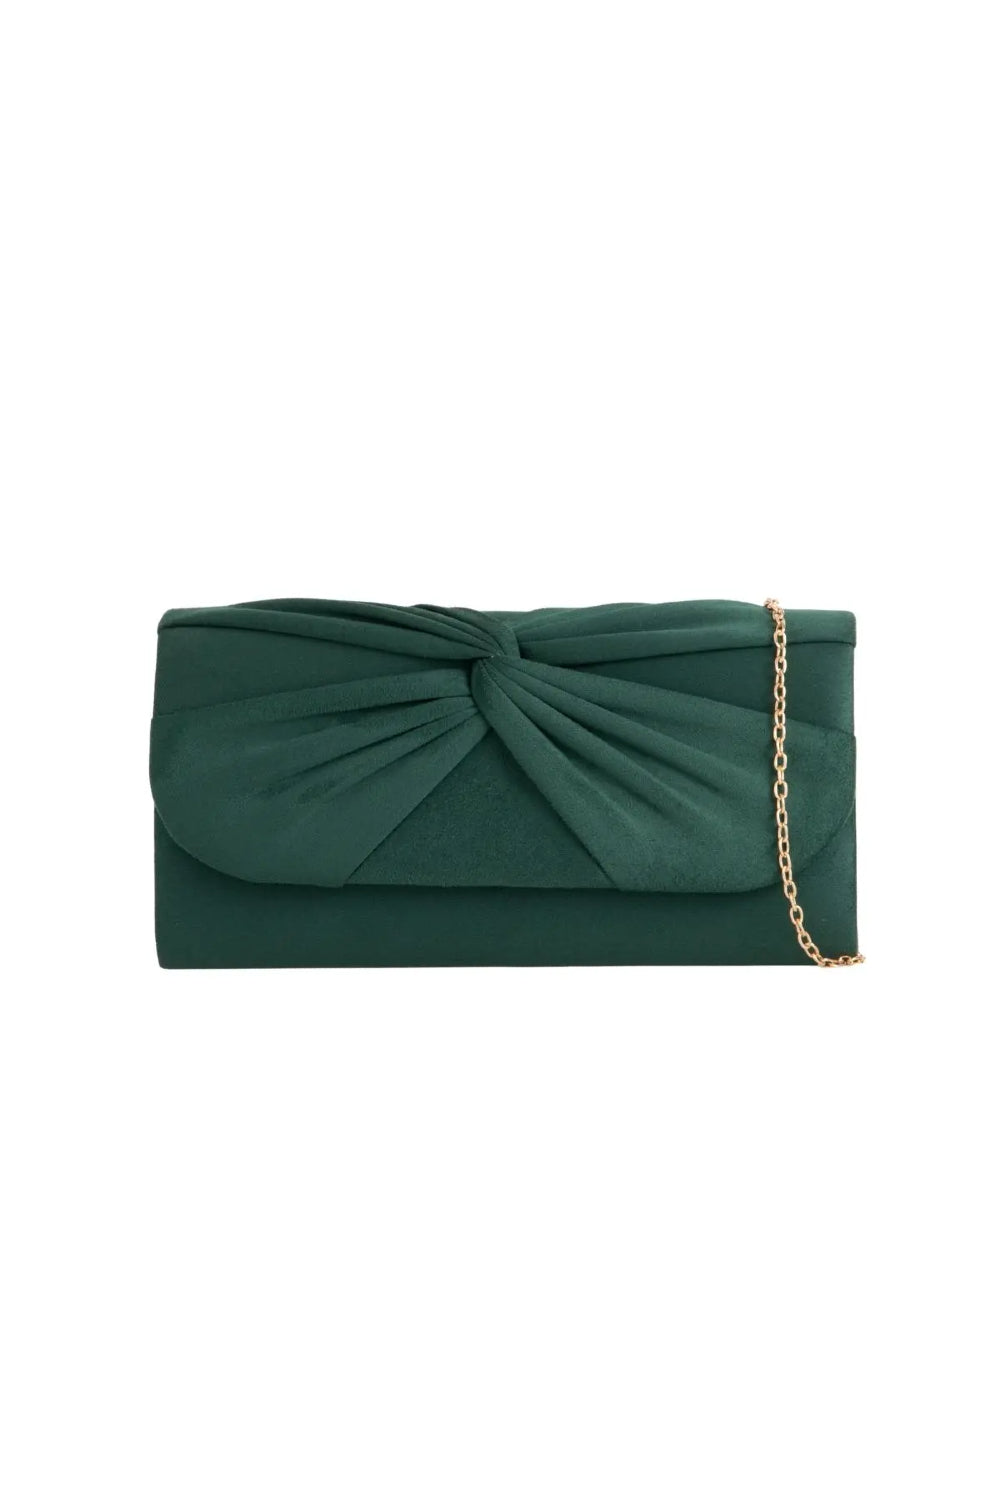 Green Suede Clutch Bag With Knot Detail ALJ2724